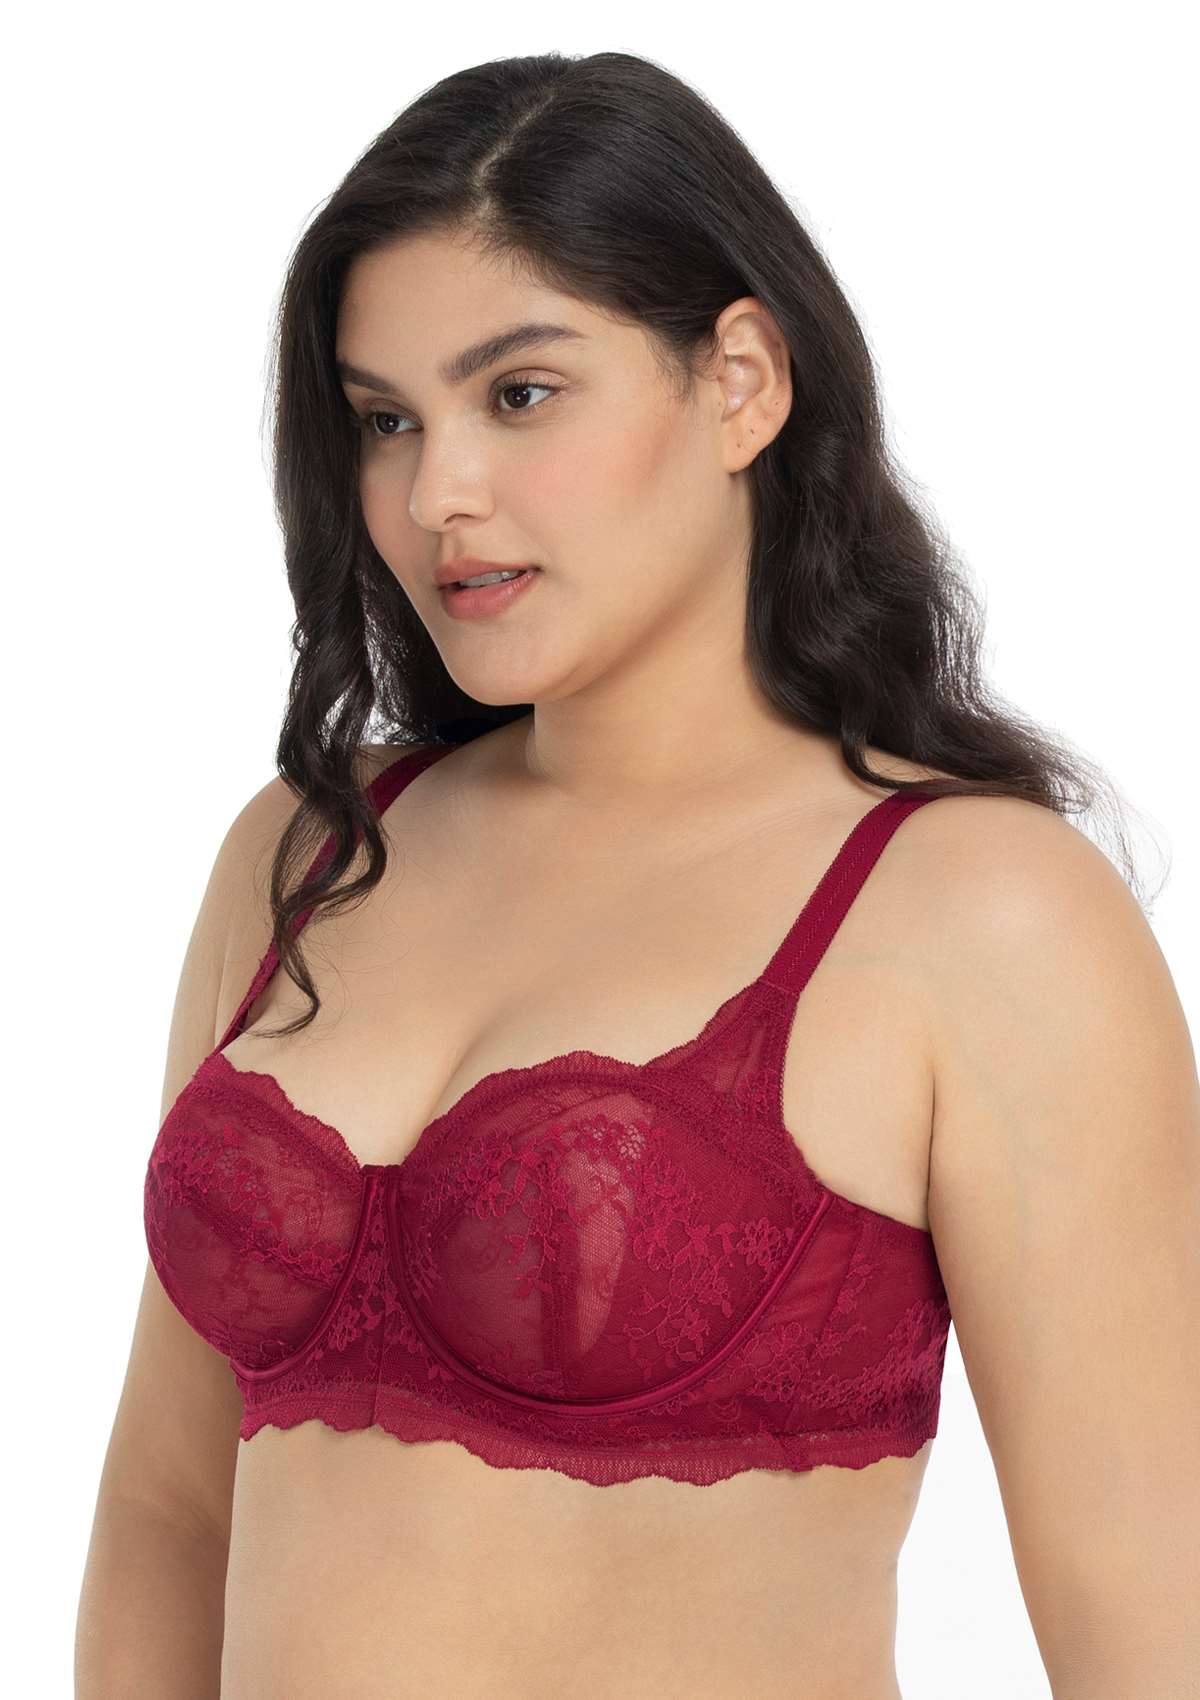 HSIA Floral Lace Unlined Bridal Balconette Bra Set - Supportive Classic - Burgundy / 36 / DDD/F